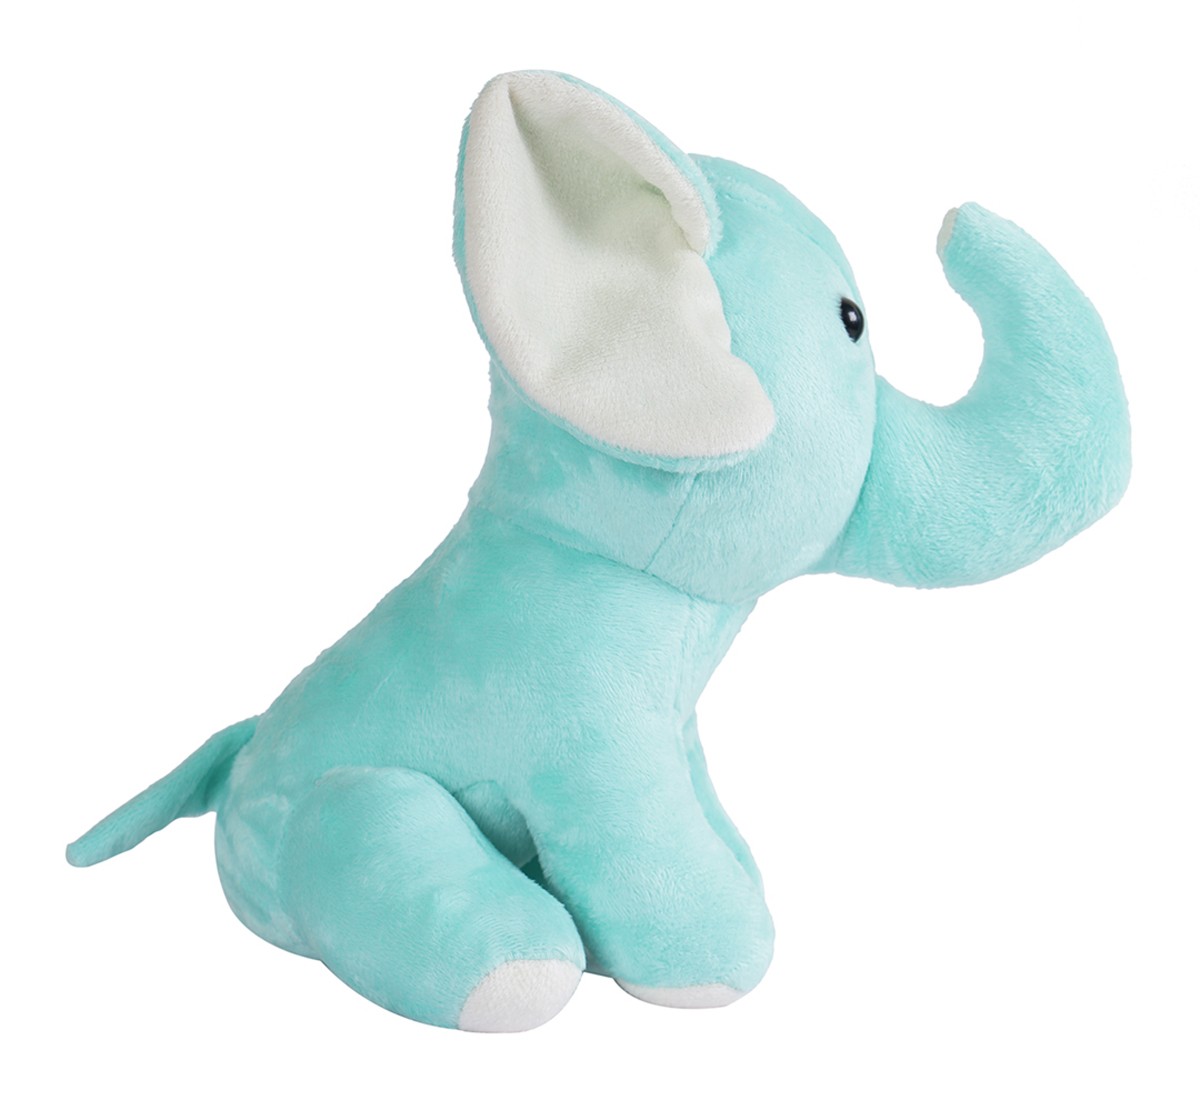 Furrendz Playful Eli 10" Plush Green for Kids 1 Year and Above